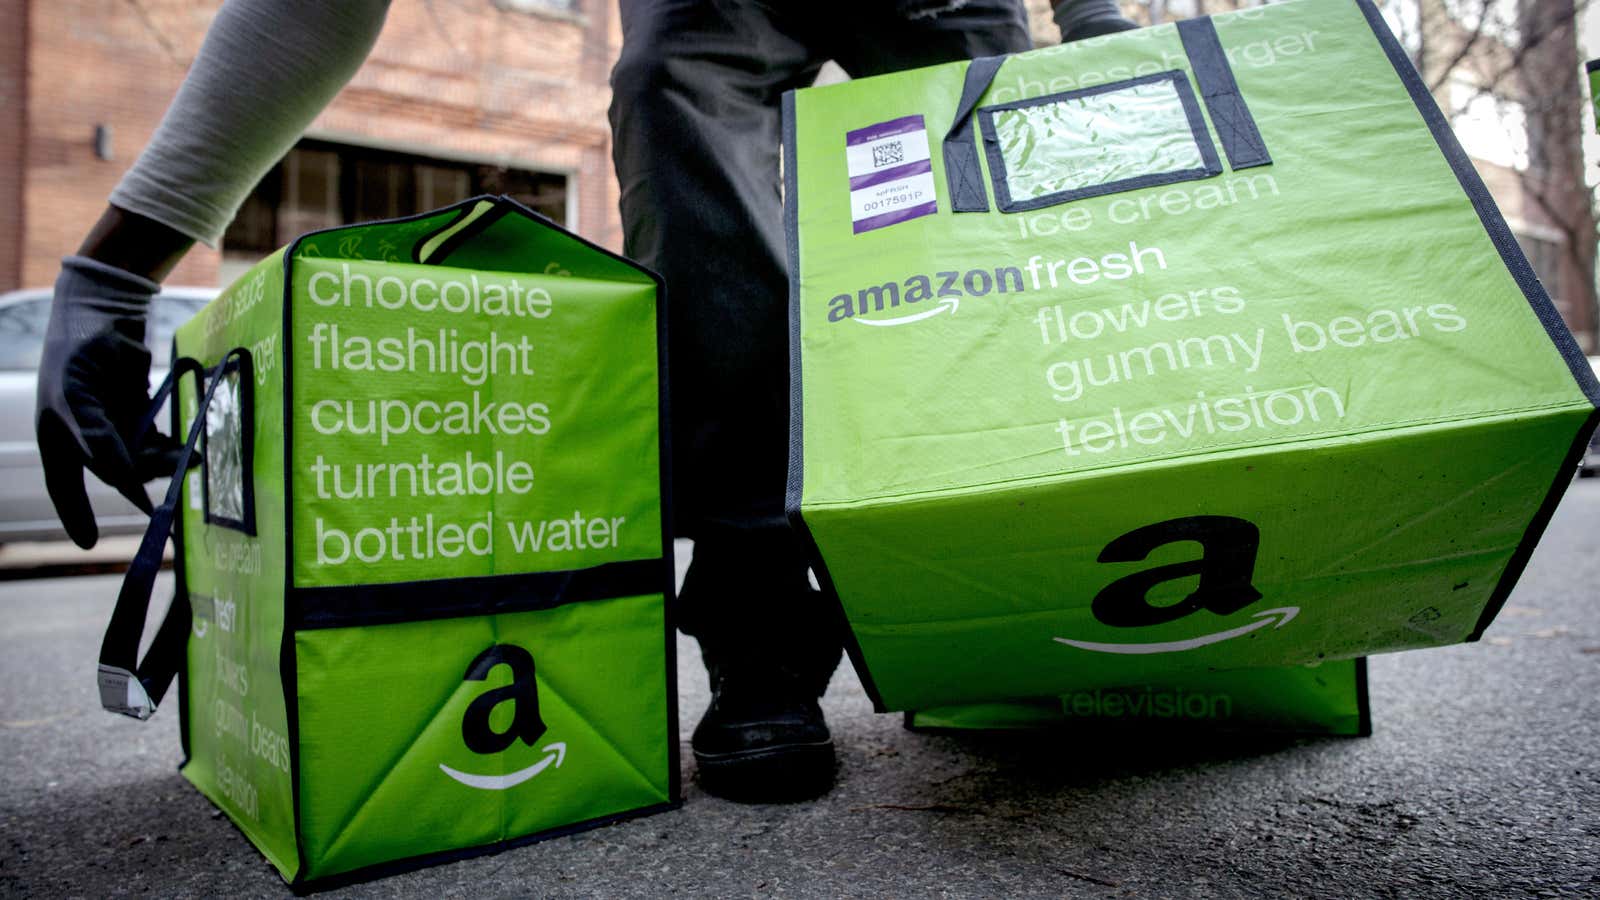 Amazon is getting deeper into groceries.